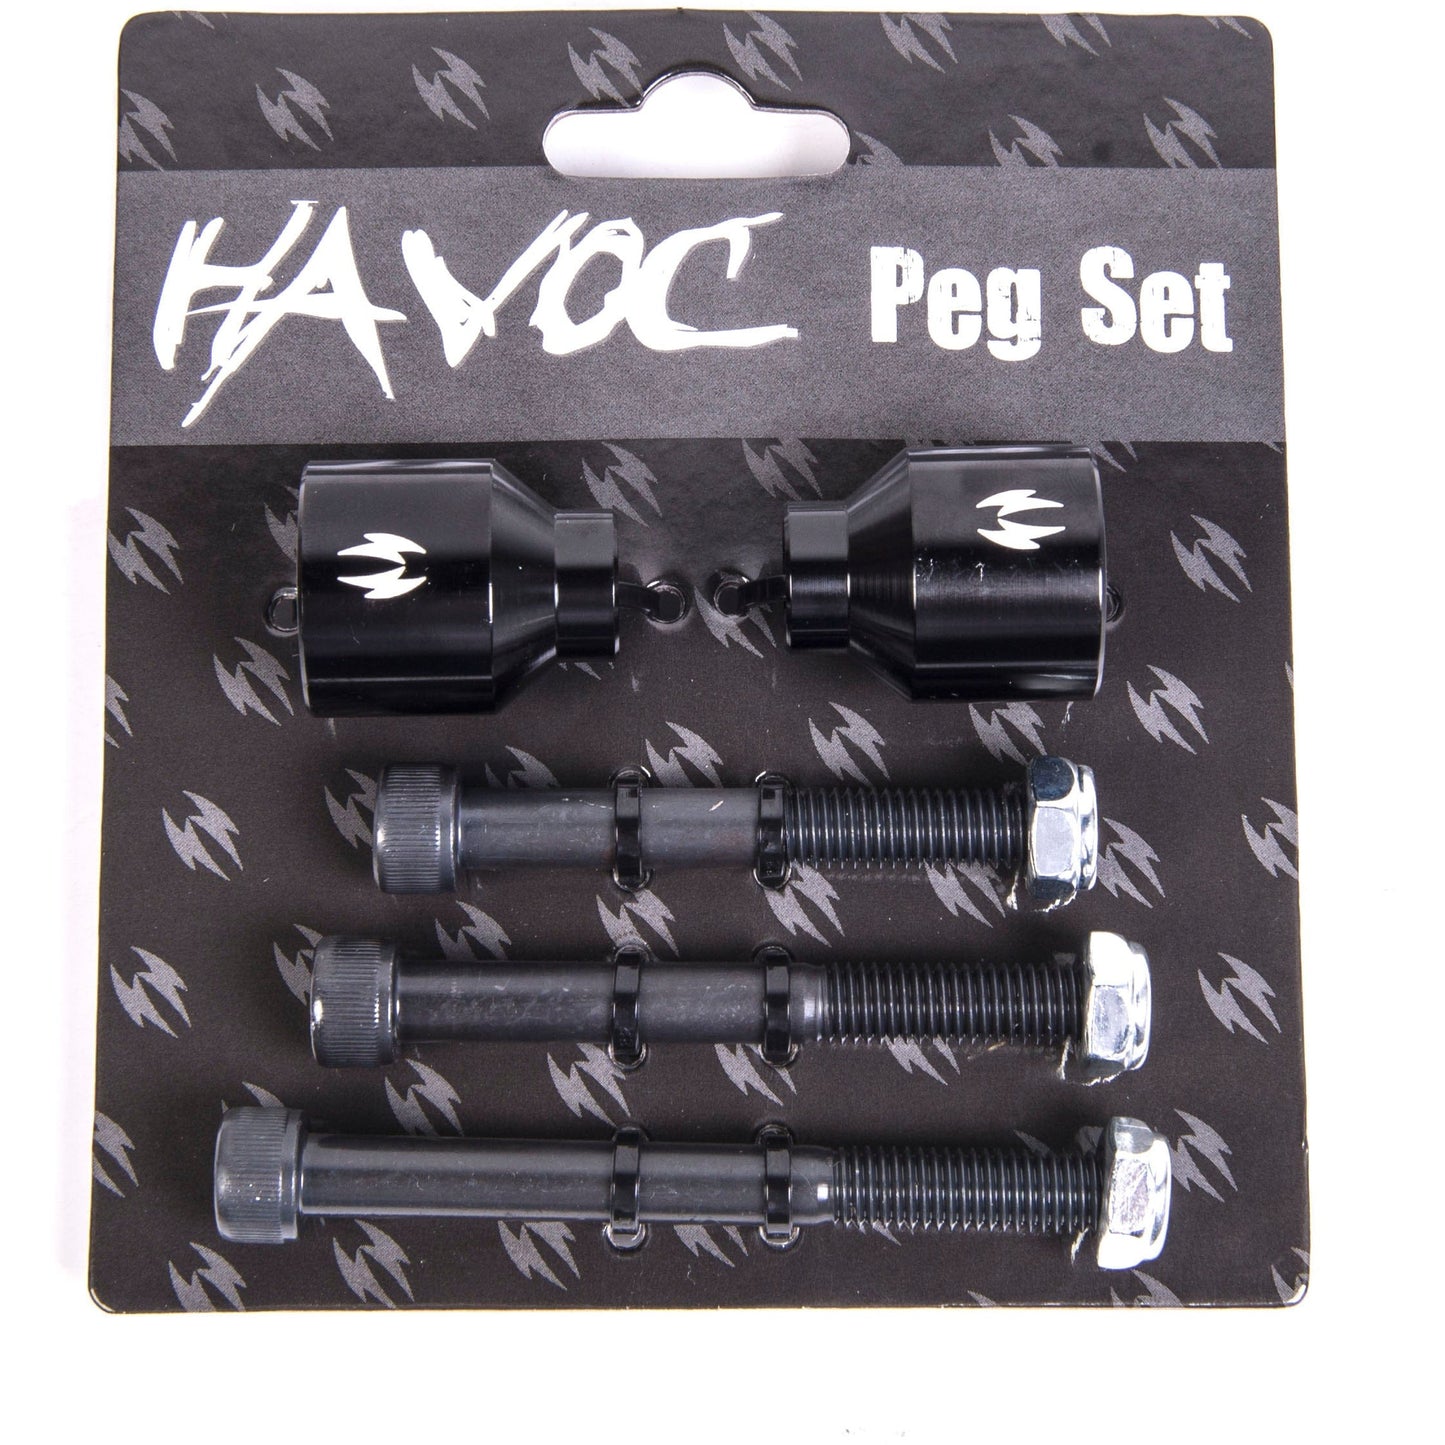 Scooter Parts Havoc Pro Scooter Aluminum Pegs The Groove Skate Shop The Groove Skate Shop